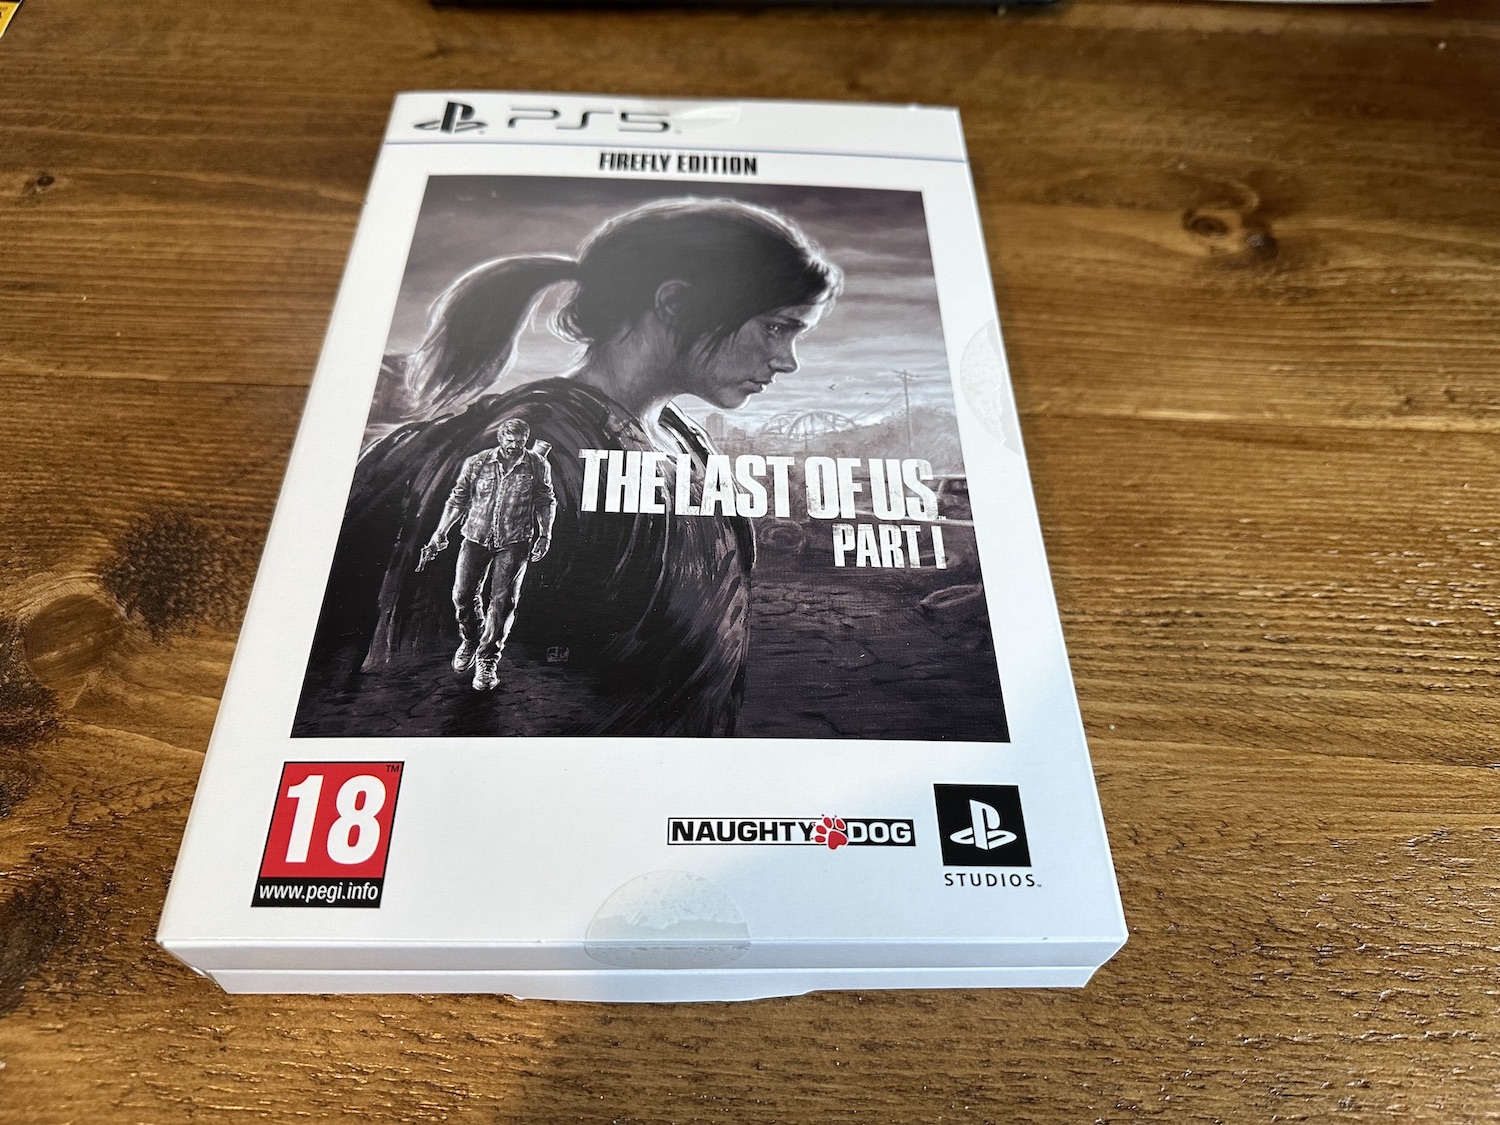 A white carboard box with the cover art for The Last of Us on the front